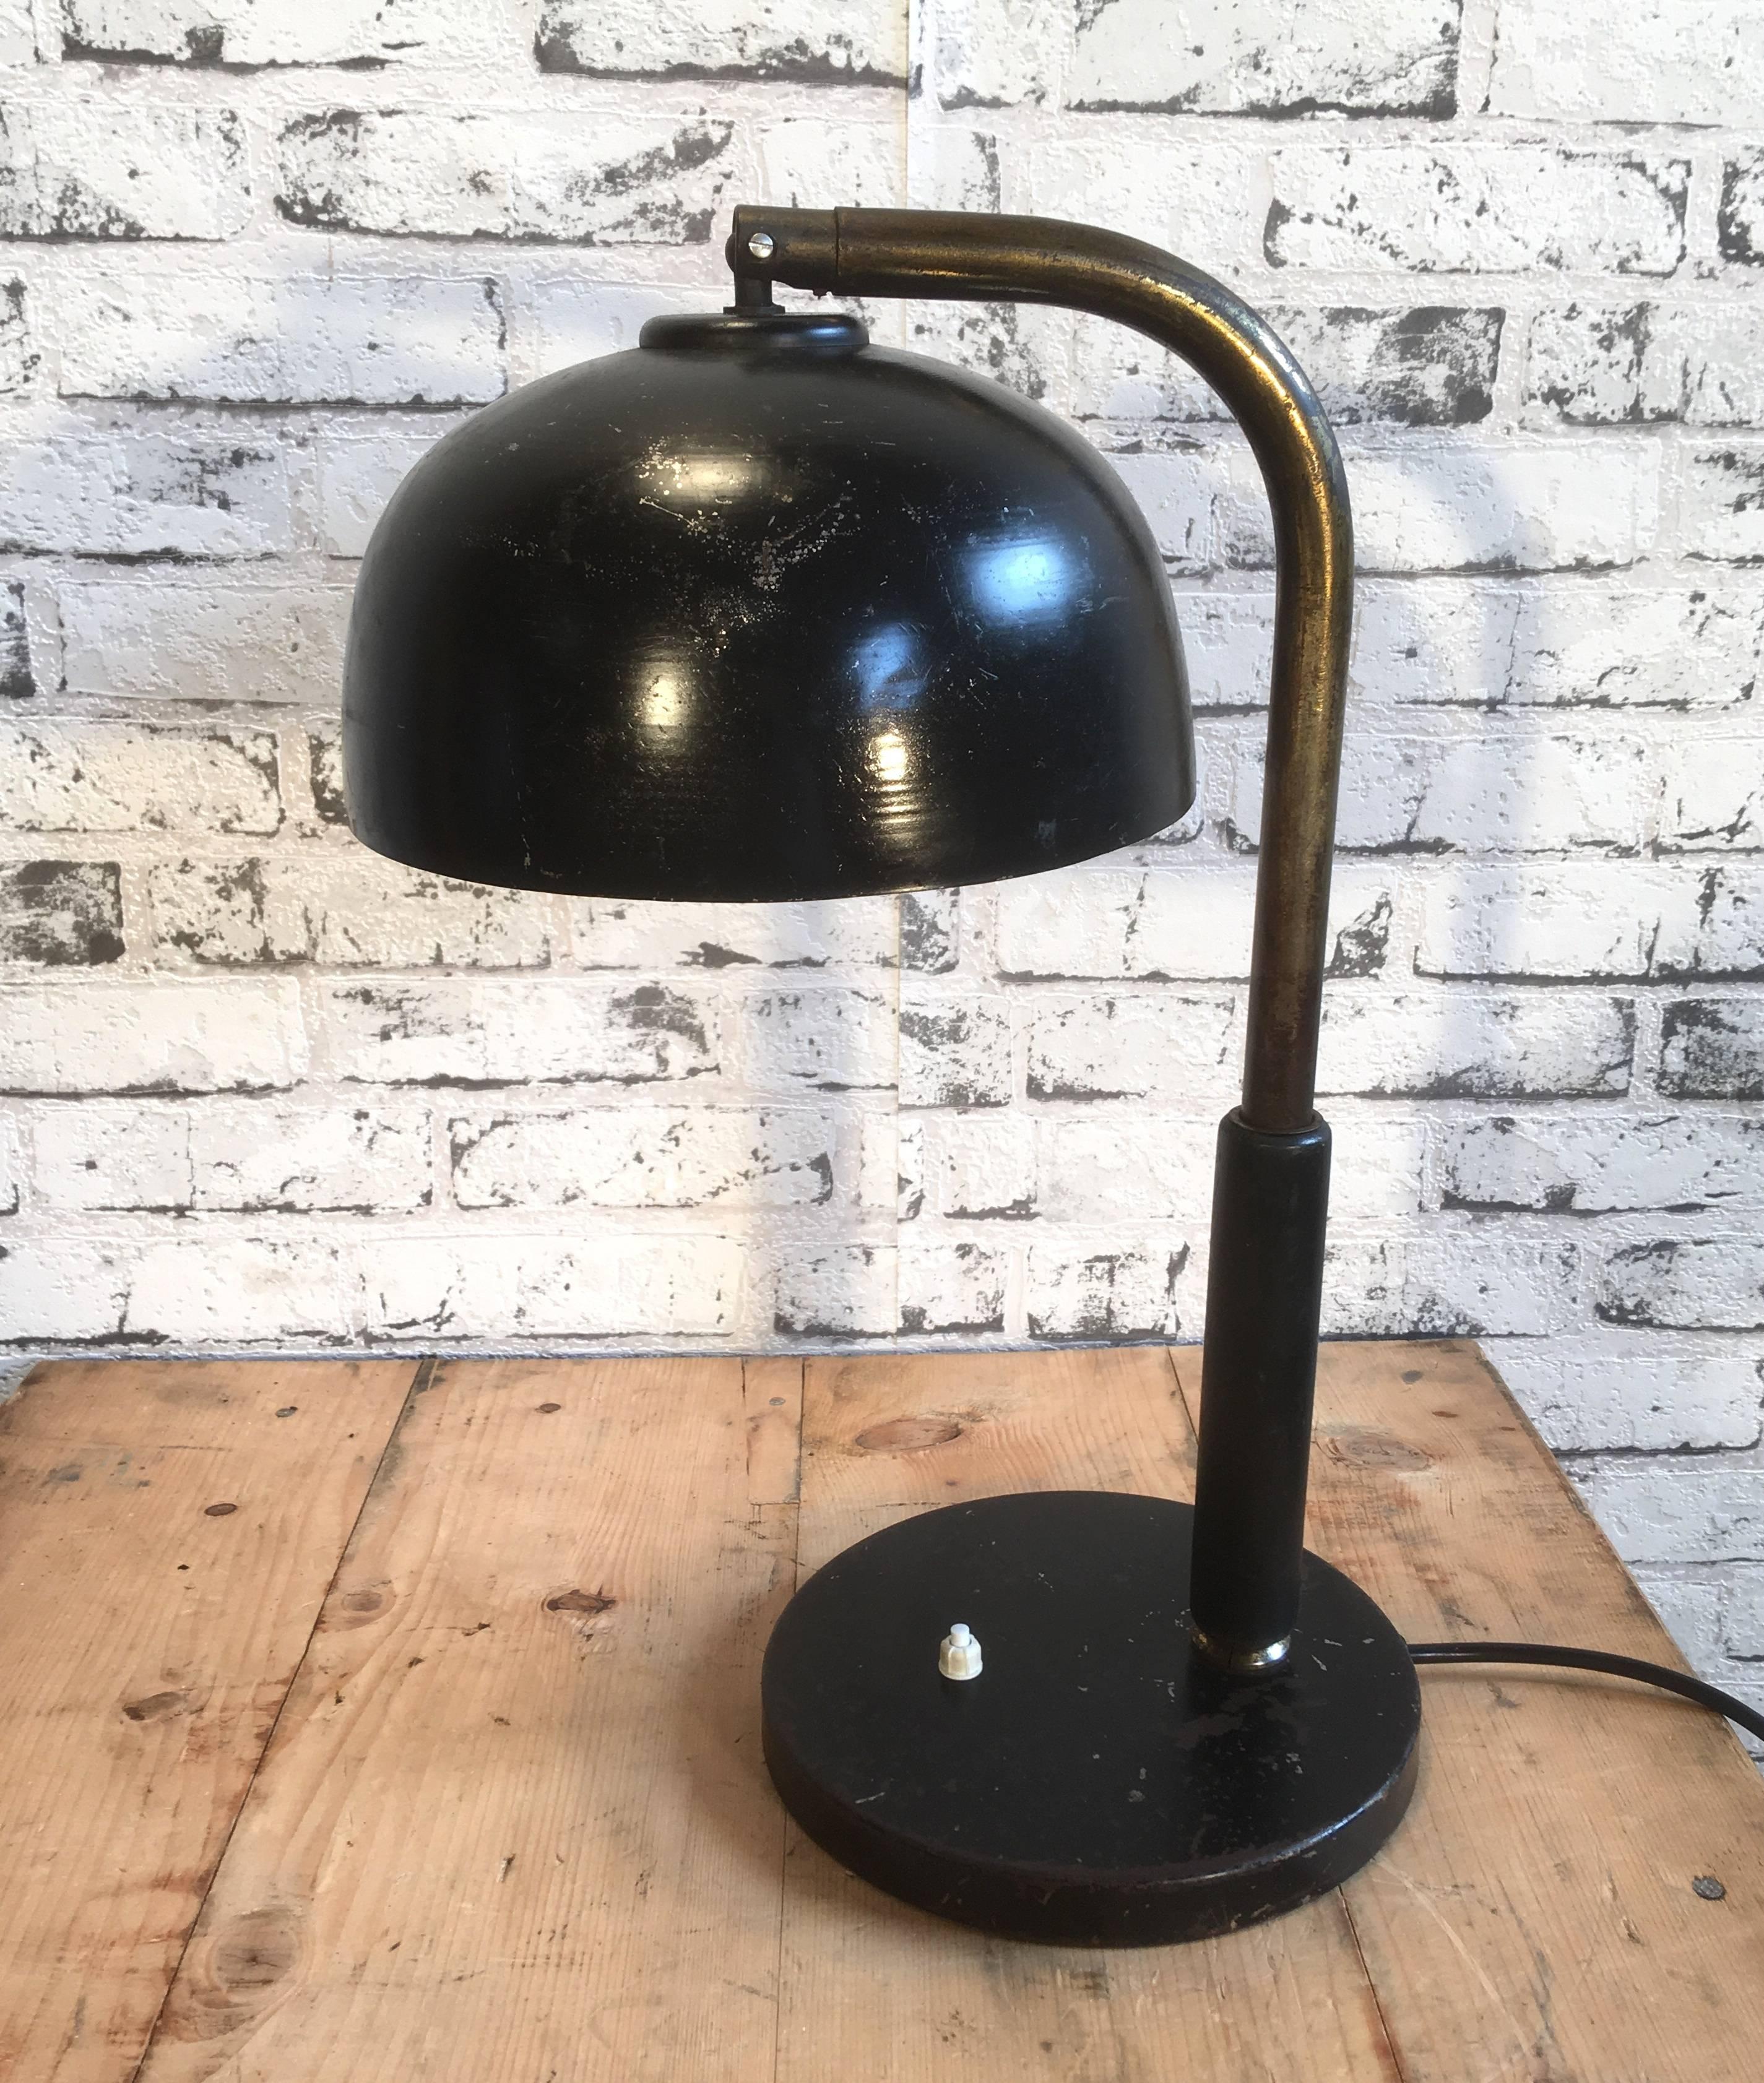 Vintage black table lamp, 1930s .Fully functional in good vintage condition
Measures: Height 46.0 cm
Depth 30.0 cm
Other: Diameter 21 cm.